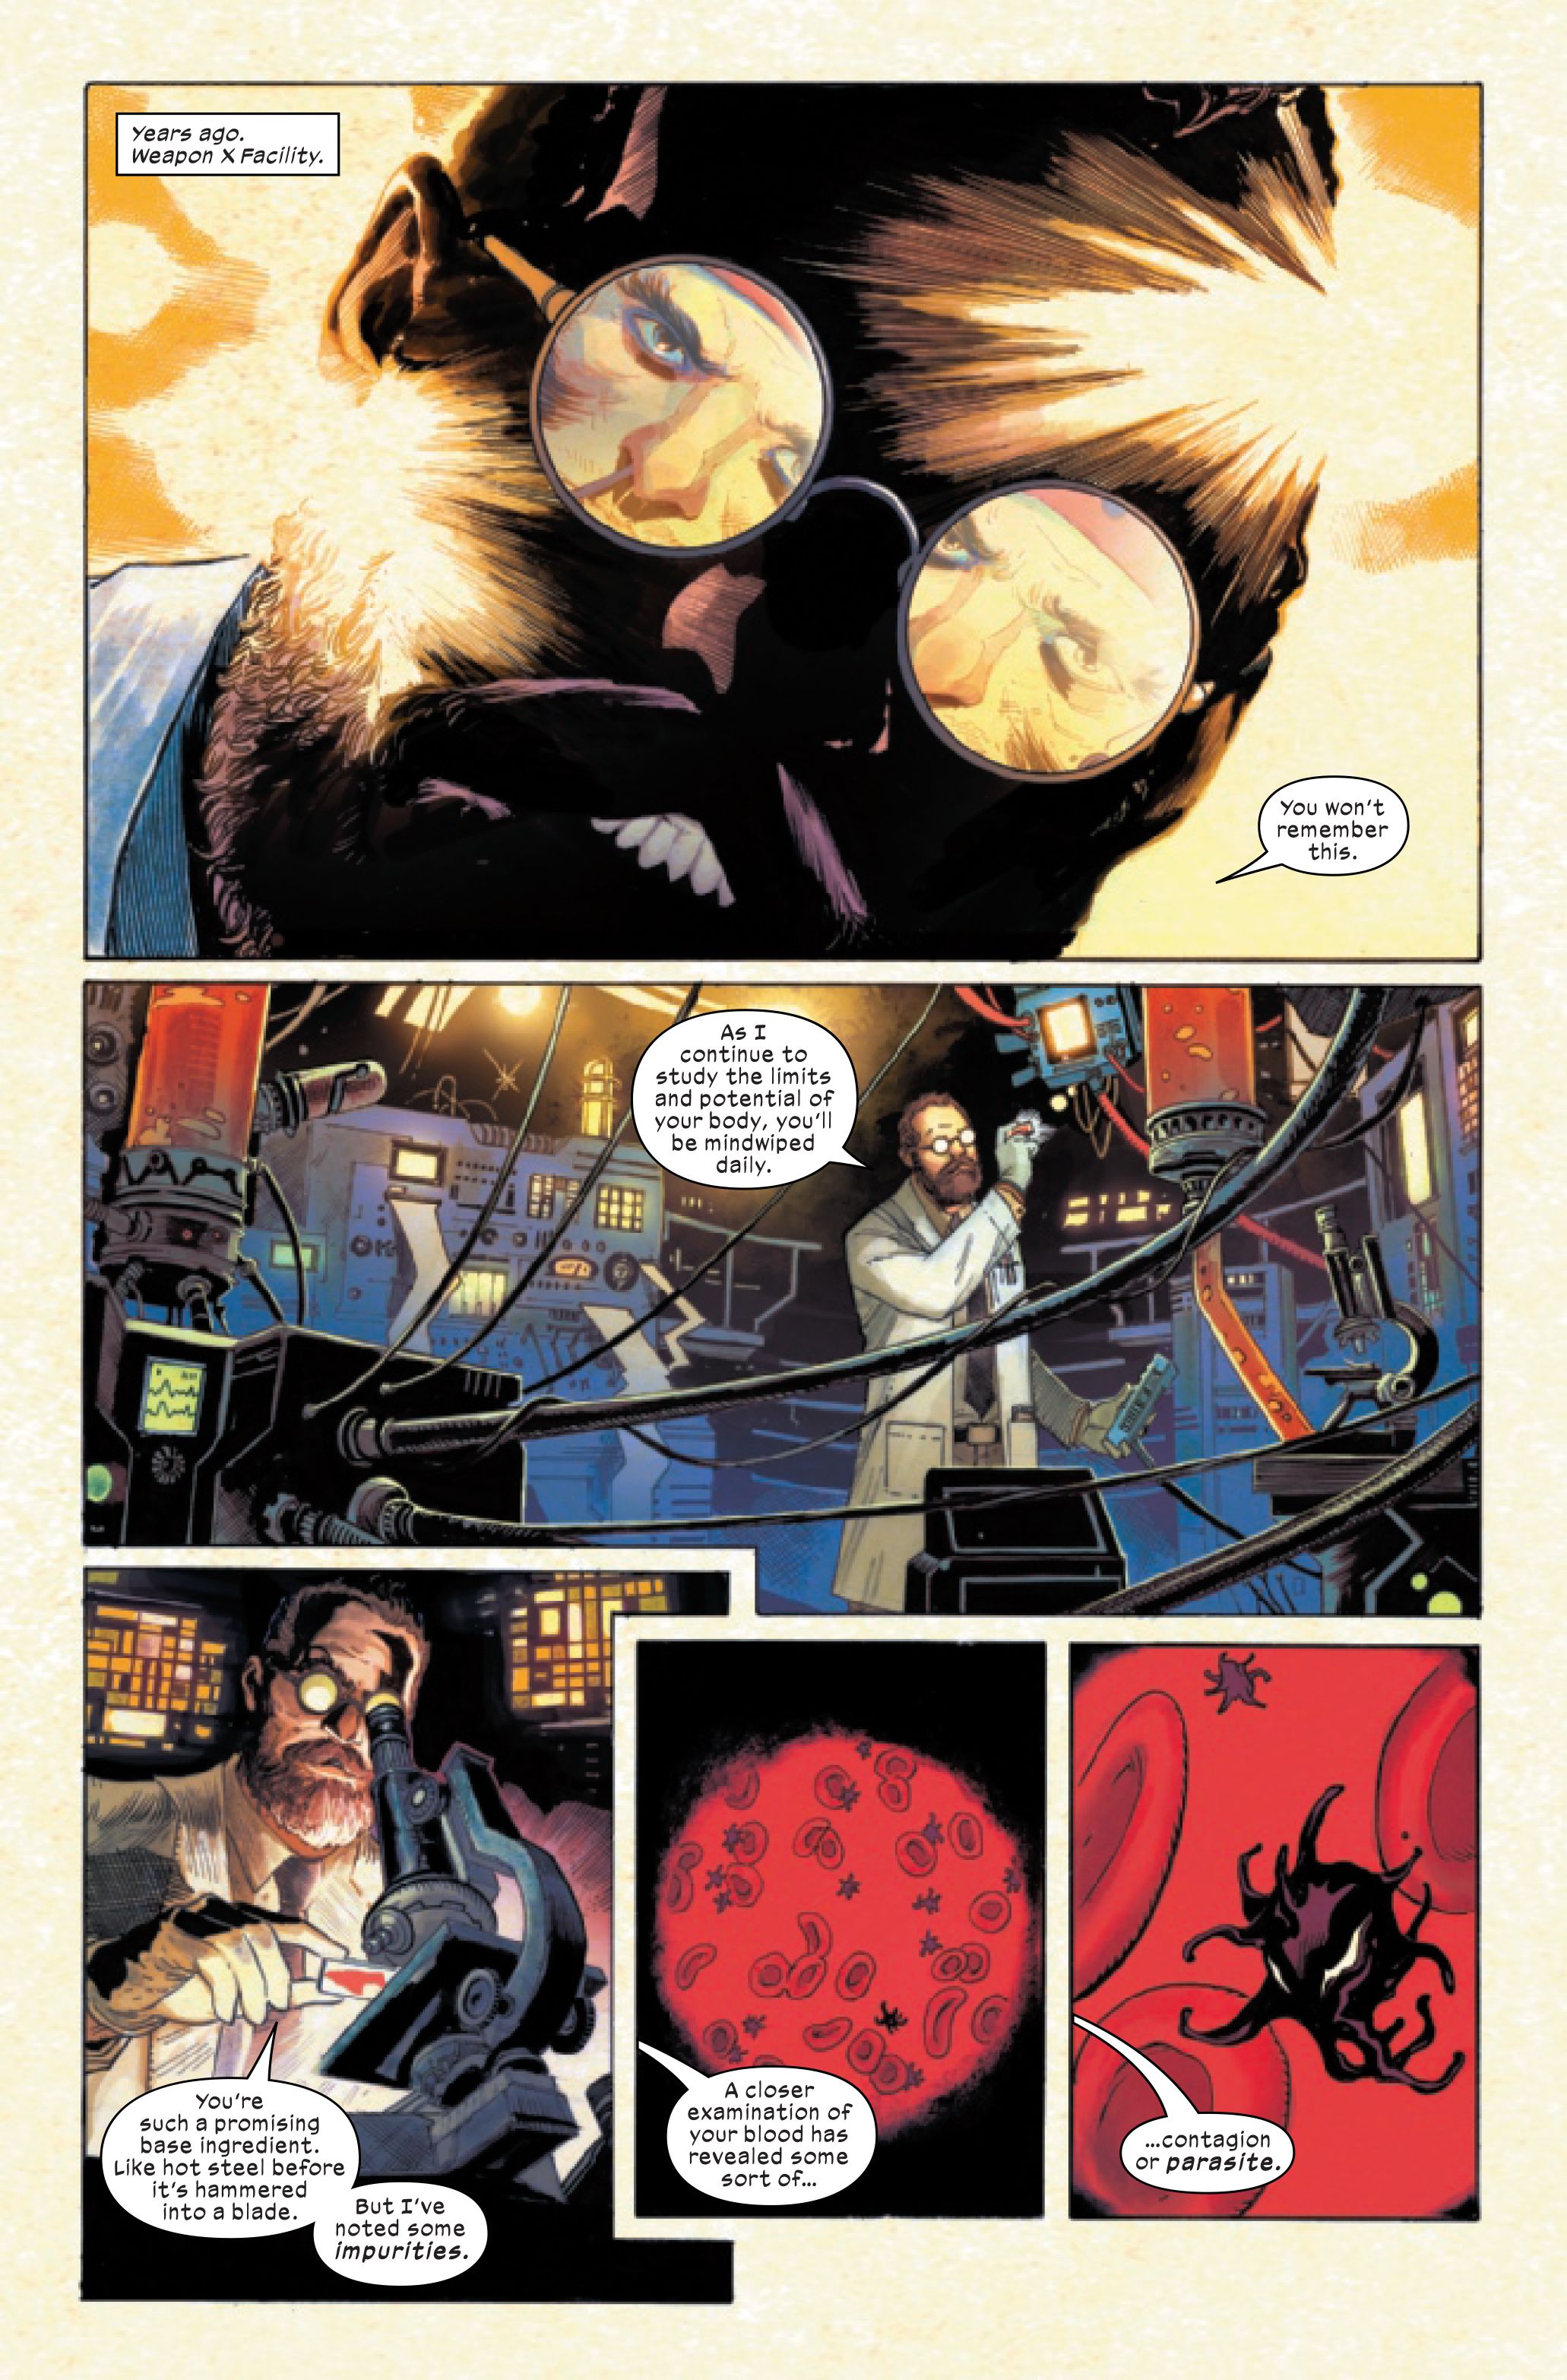 Page 1 of X Lives of Wolverine #4